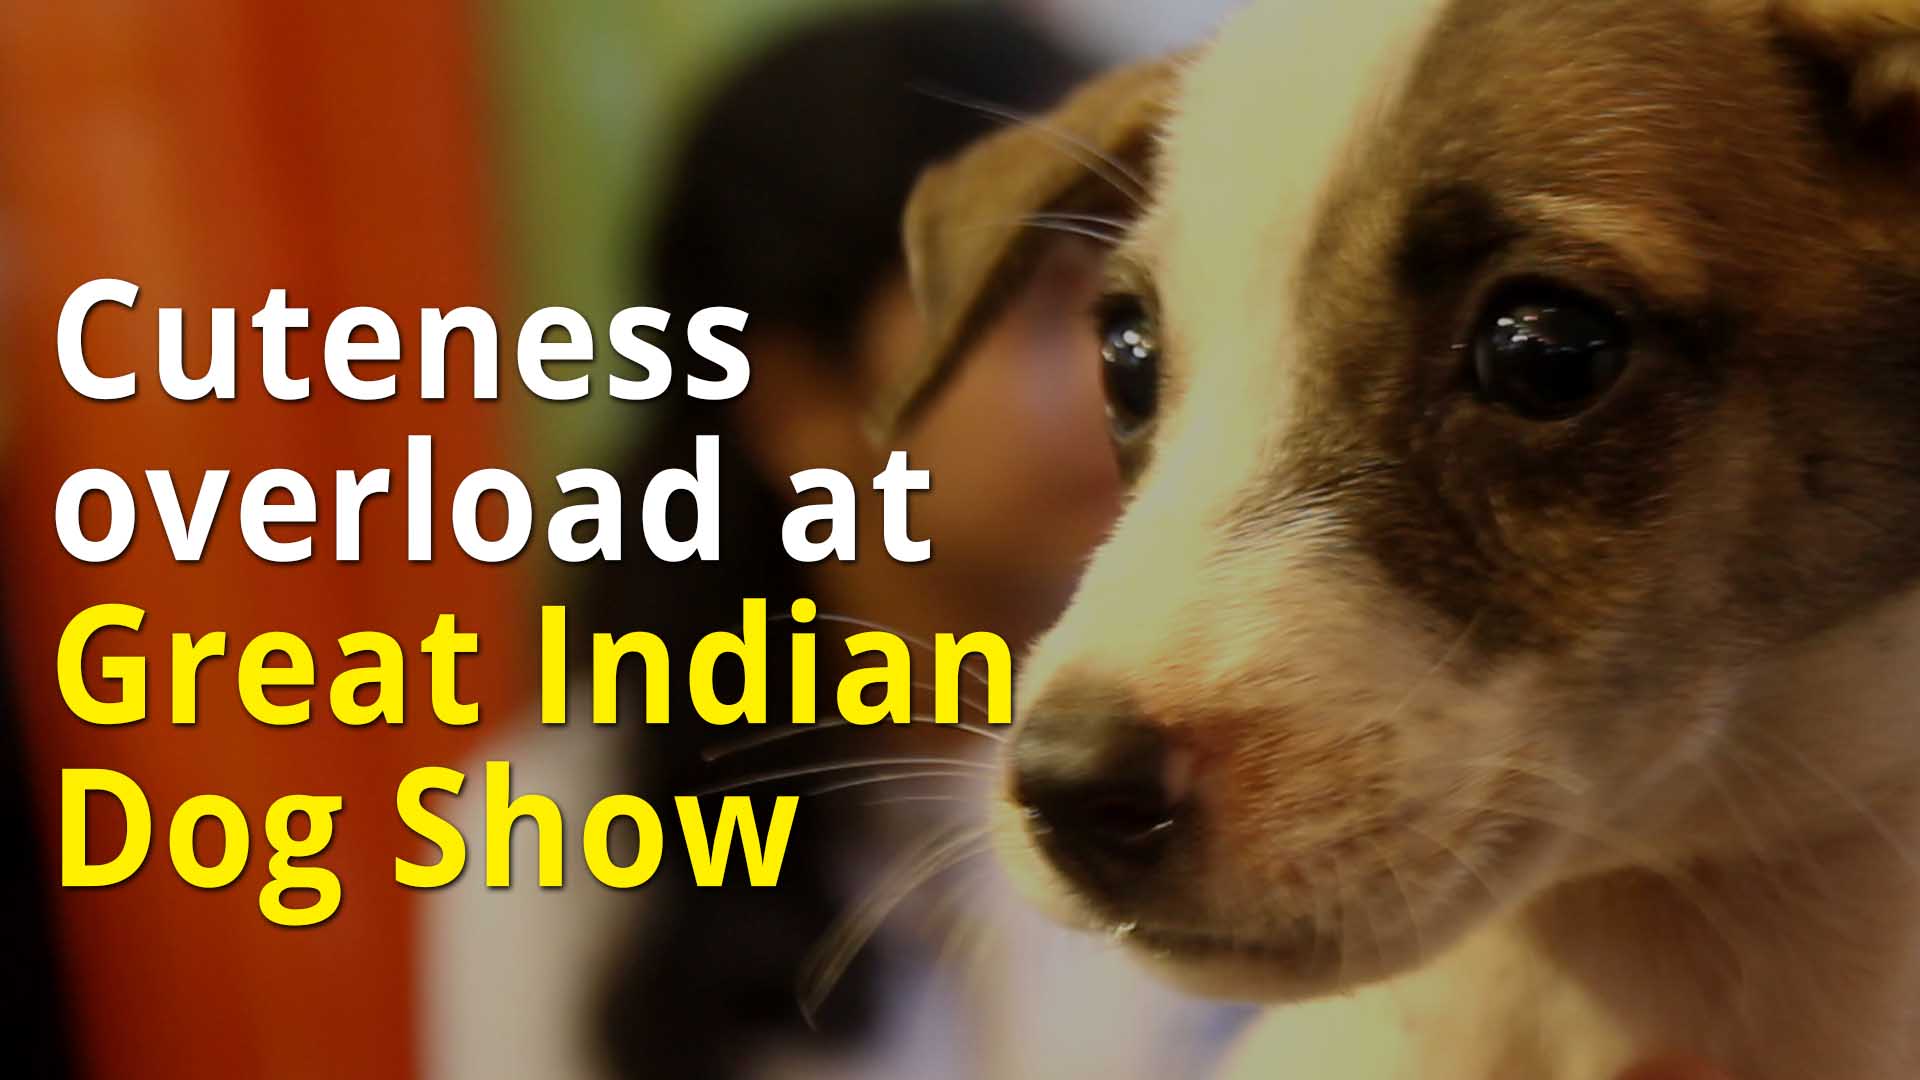 Cuteness overload at Great Indian Dog Show